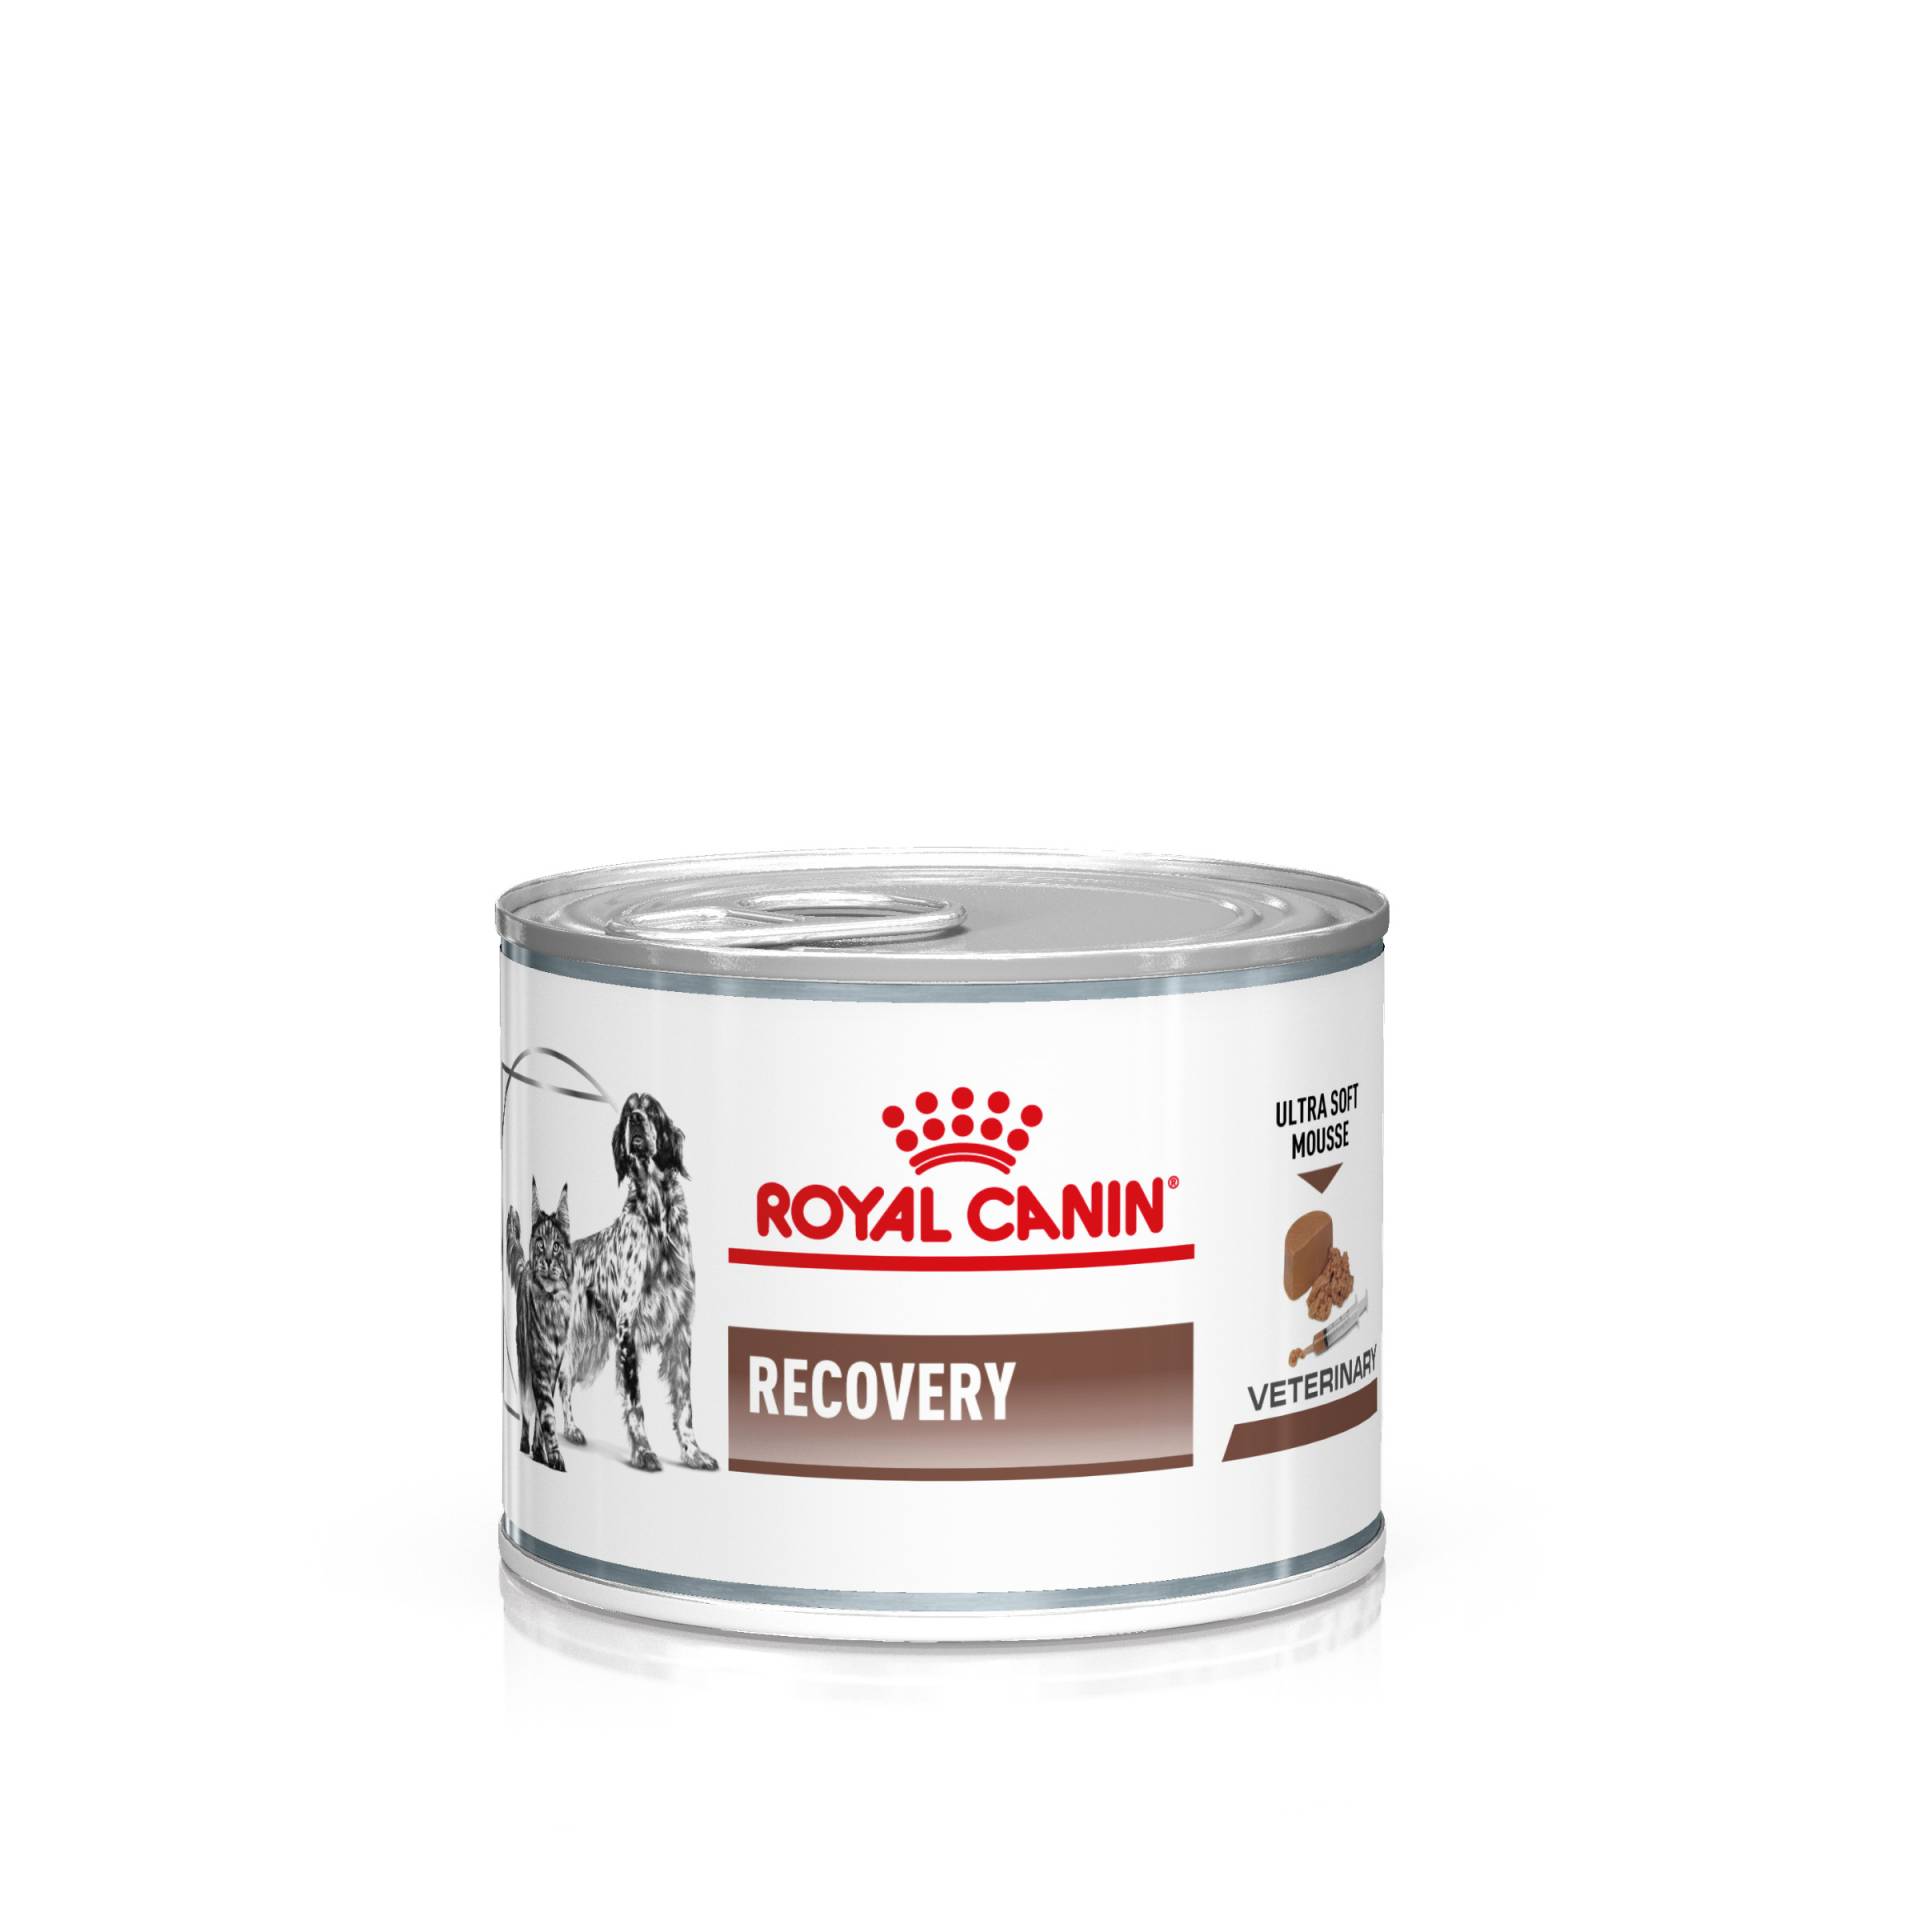 Royal Canin Veterinary Canine Recovery Mousse - 48 x 195 g von Royal Canin Veterinary Diet